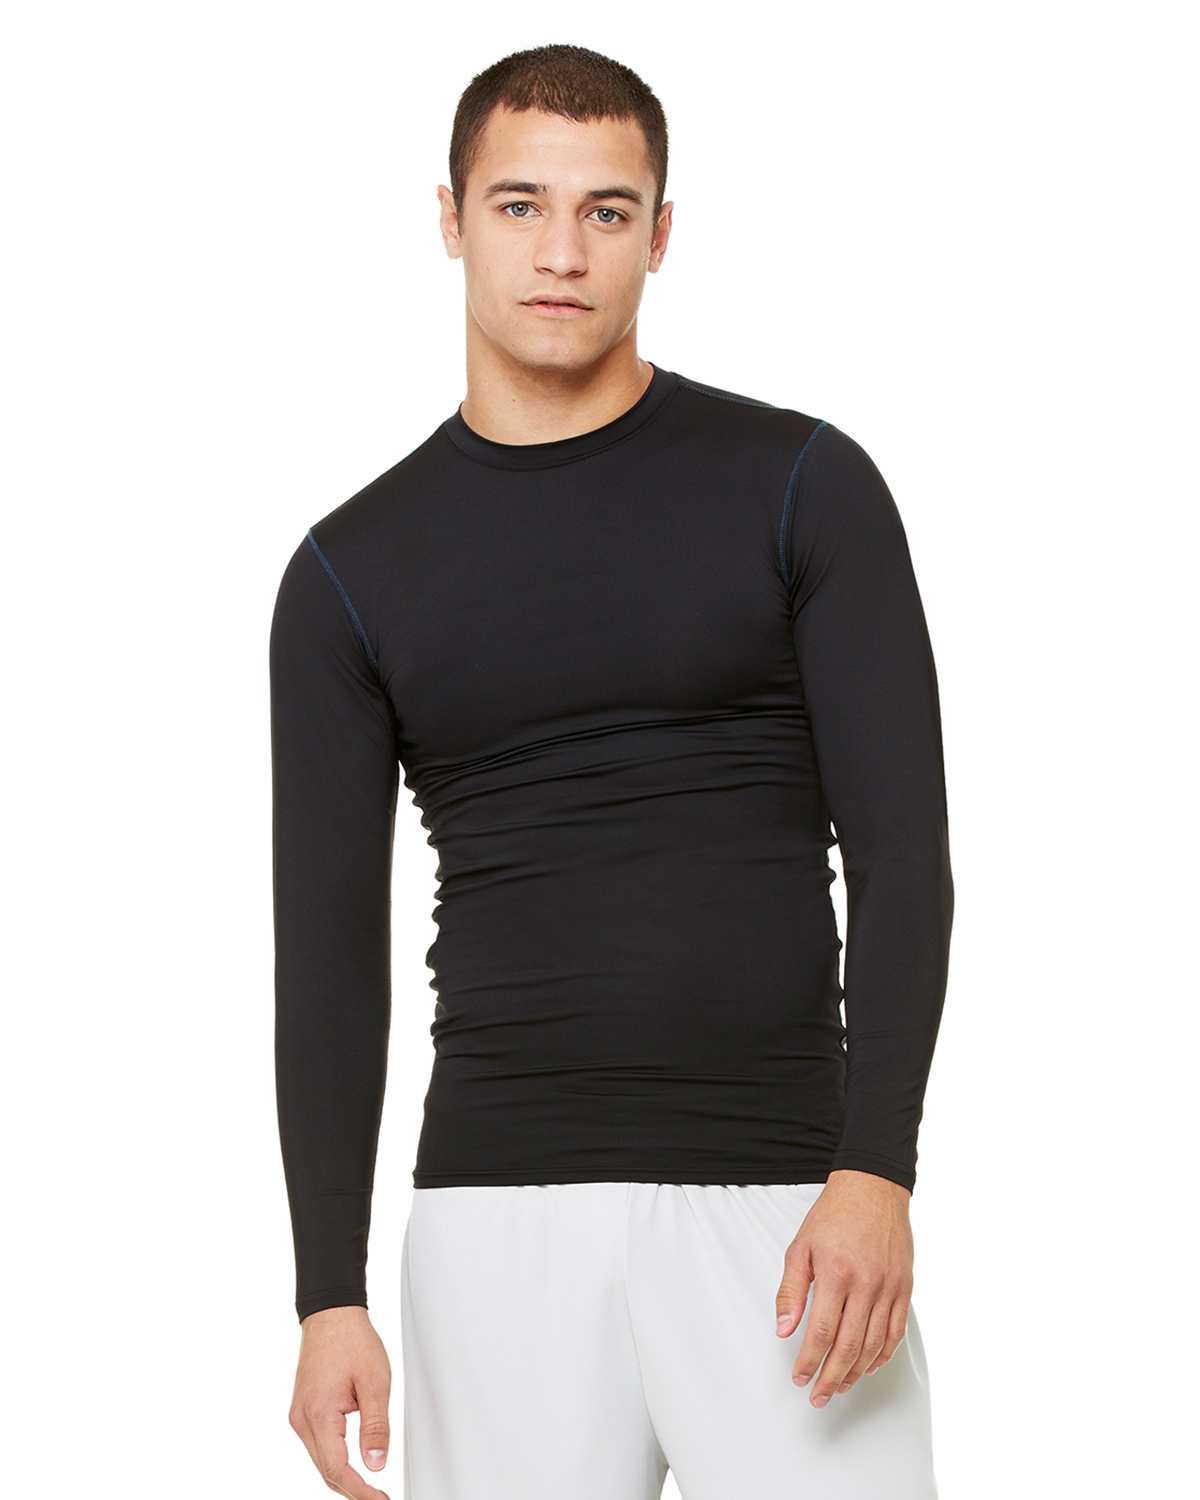 alo - Long Sleeve Compression T-Shirt $18.17